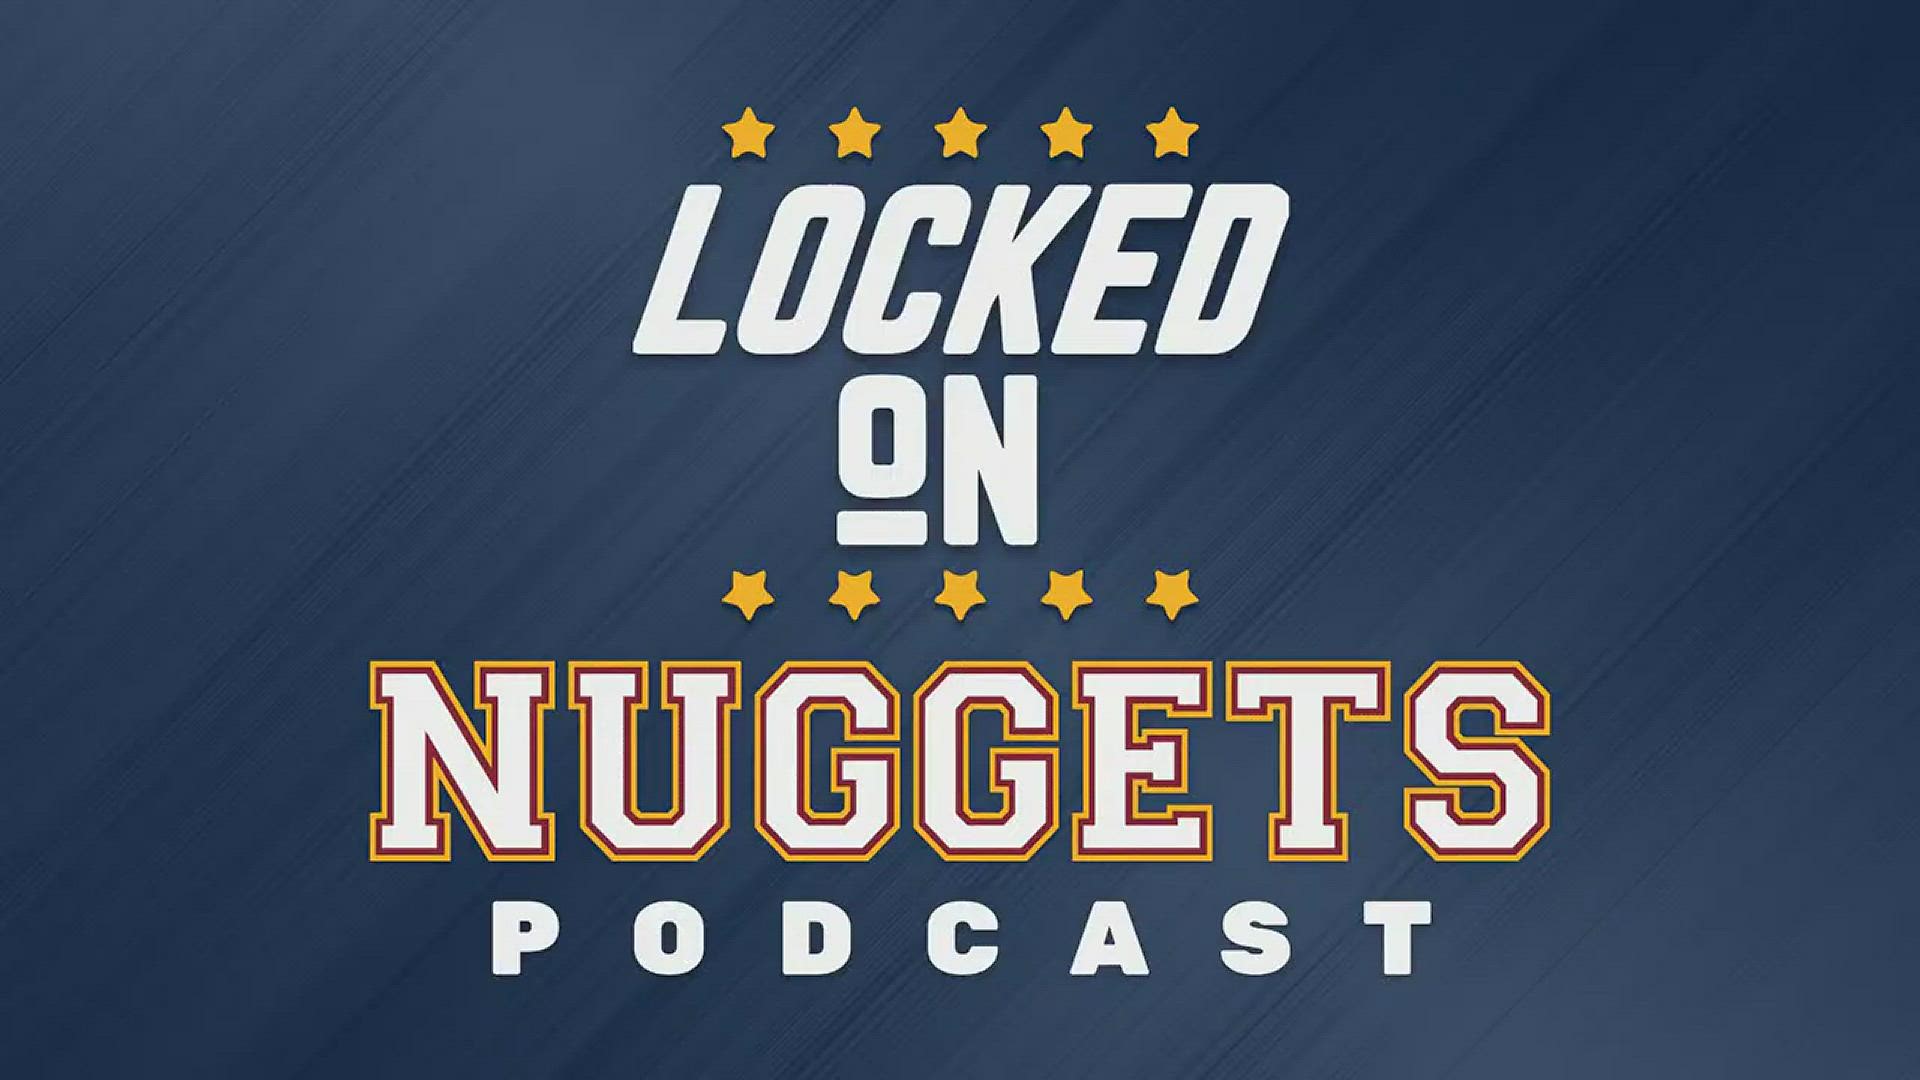 The Nuggets win ugly in a game they would have lost last year. What does clutch say about the Nuggets' playoff chances?